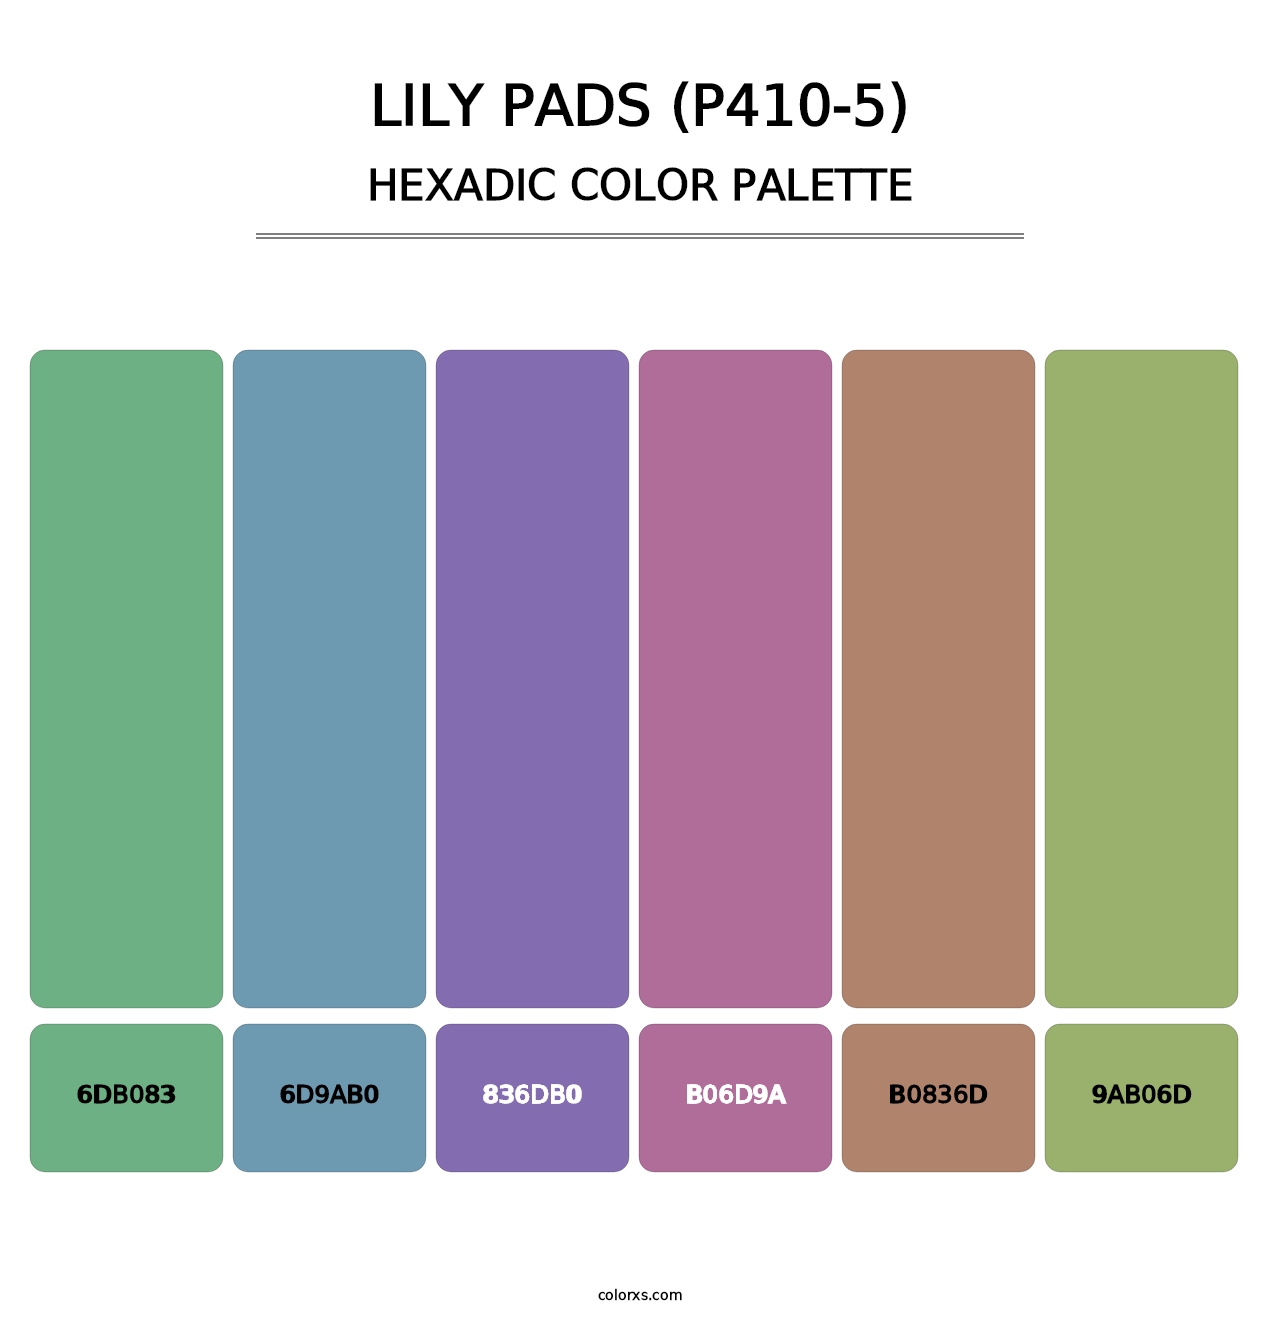 Lily Pads (P410-5) - Hexadic Color Palette